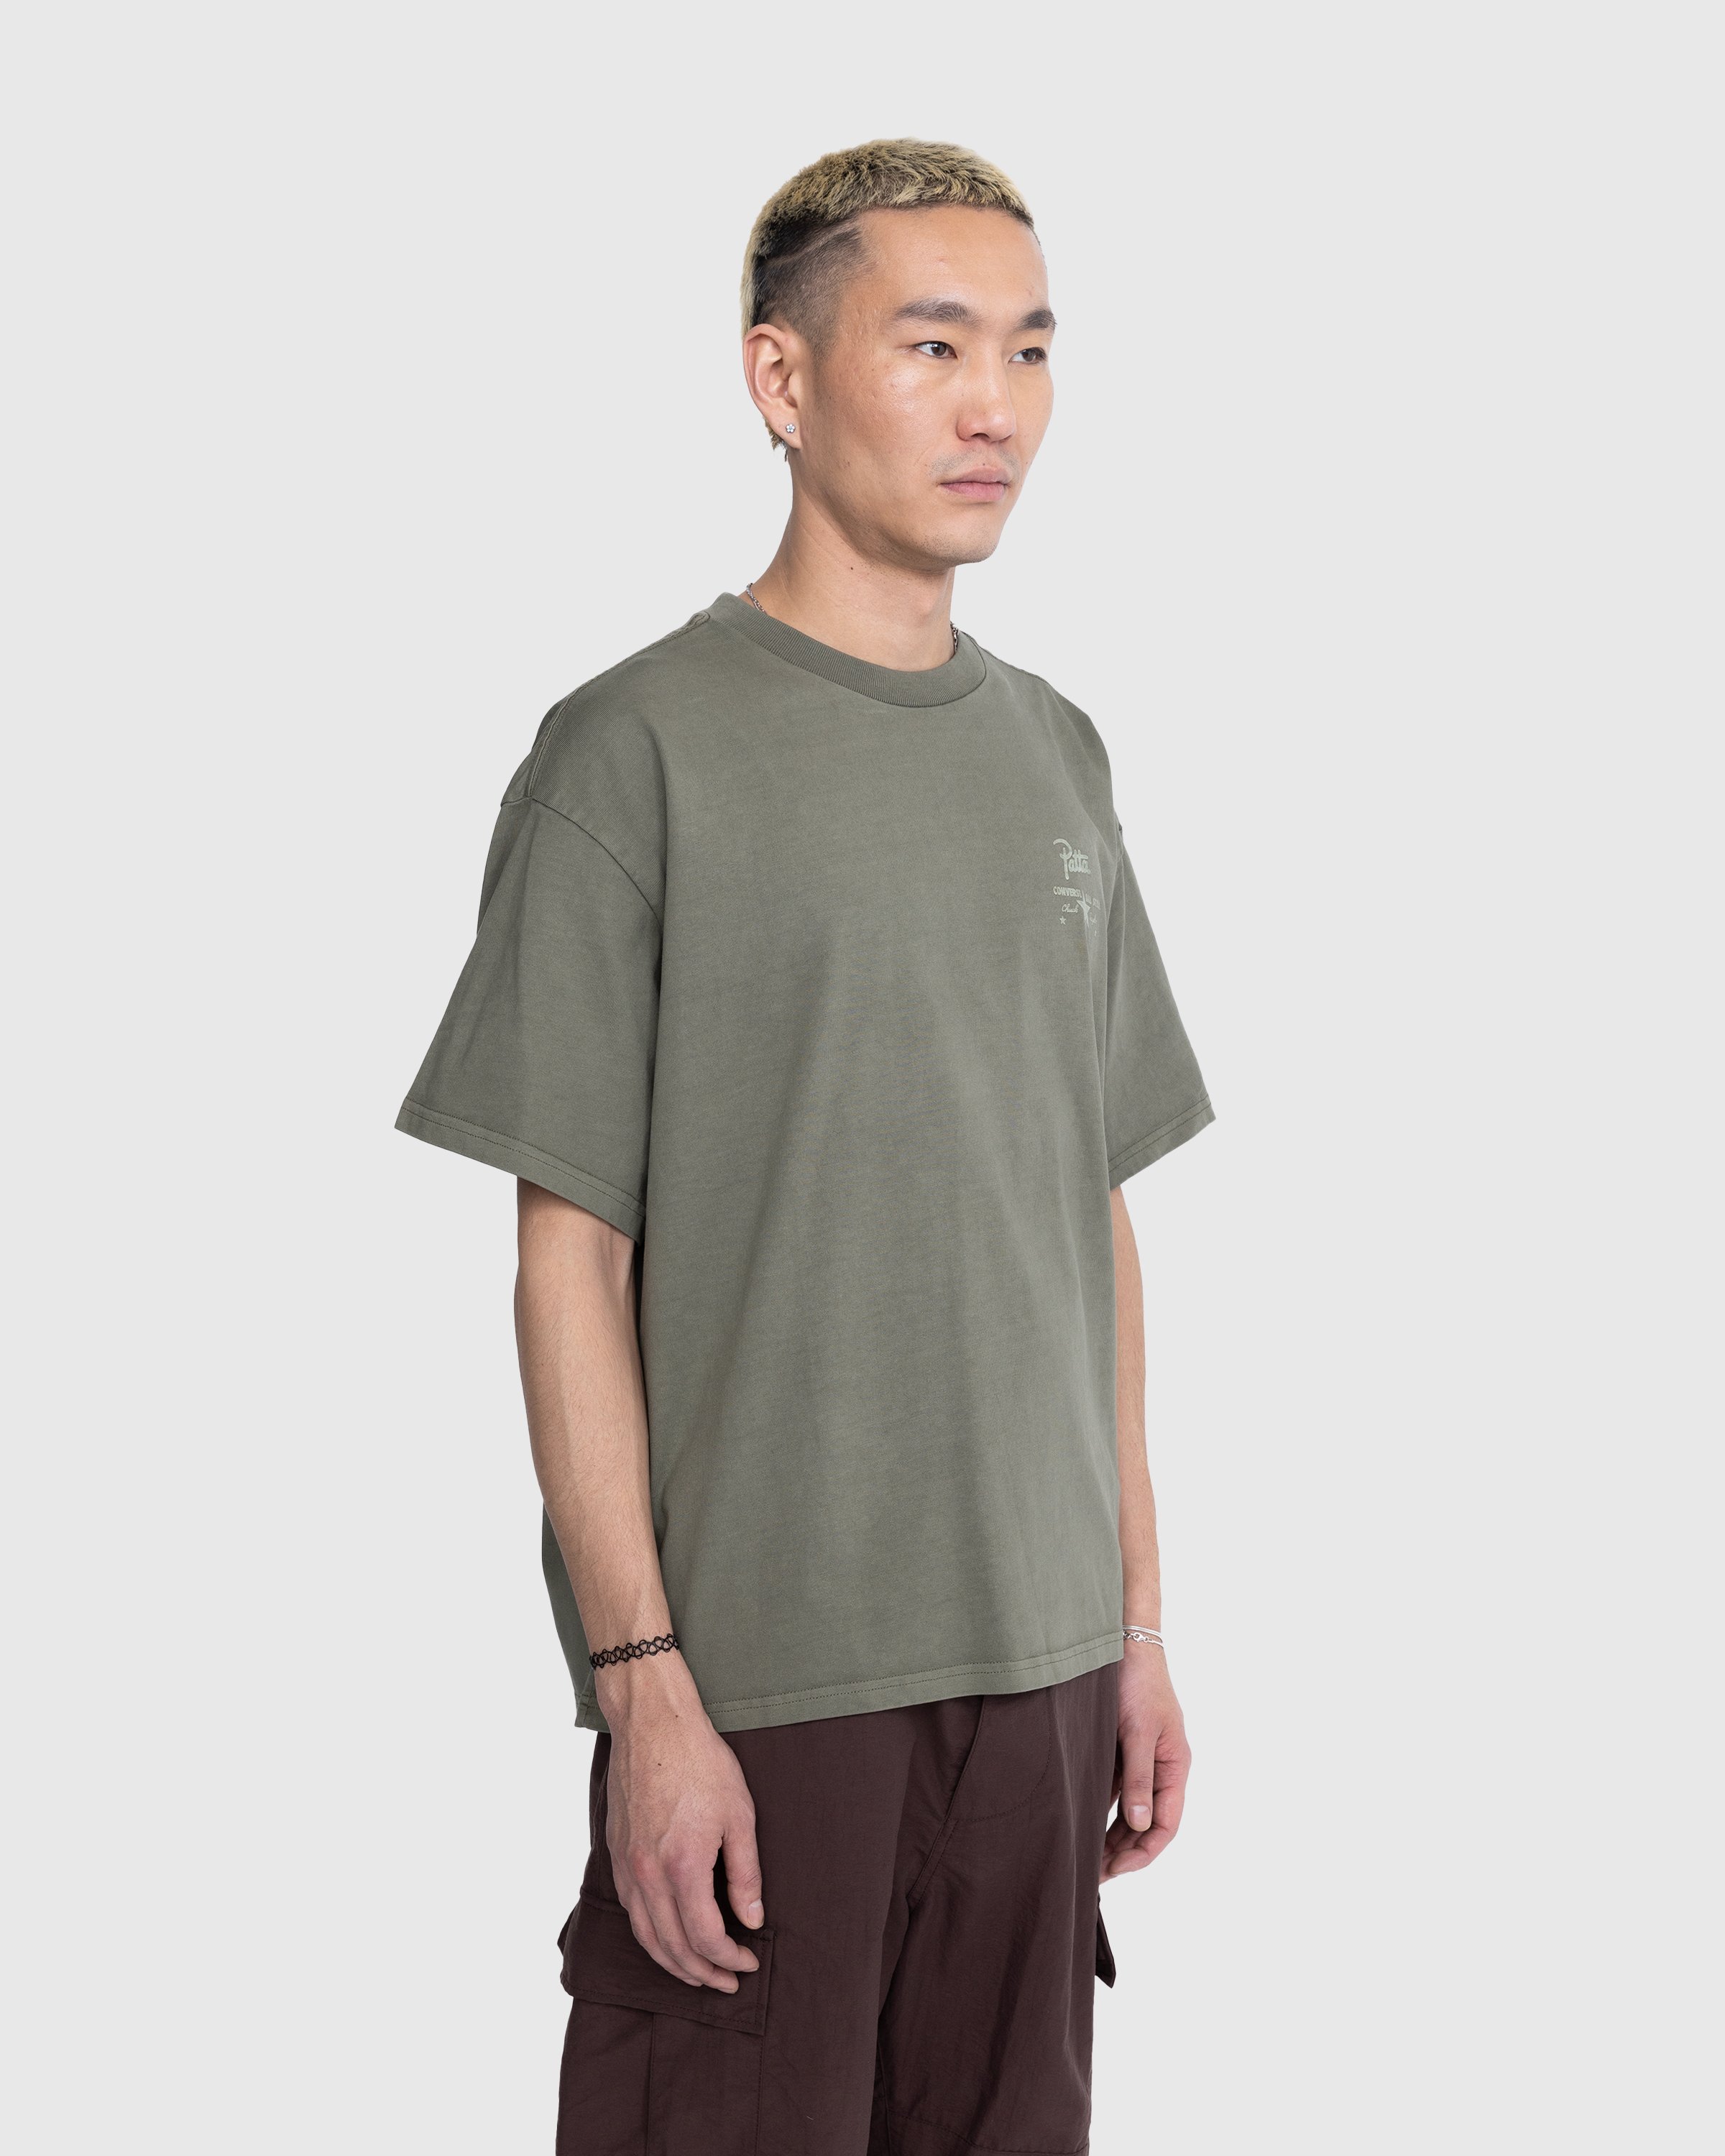 Patta x Converse - Tee Burnt Olive - Clothing - Brown - Image 5